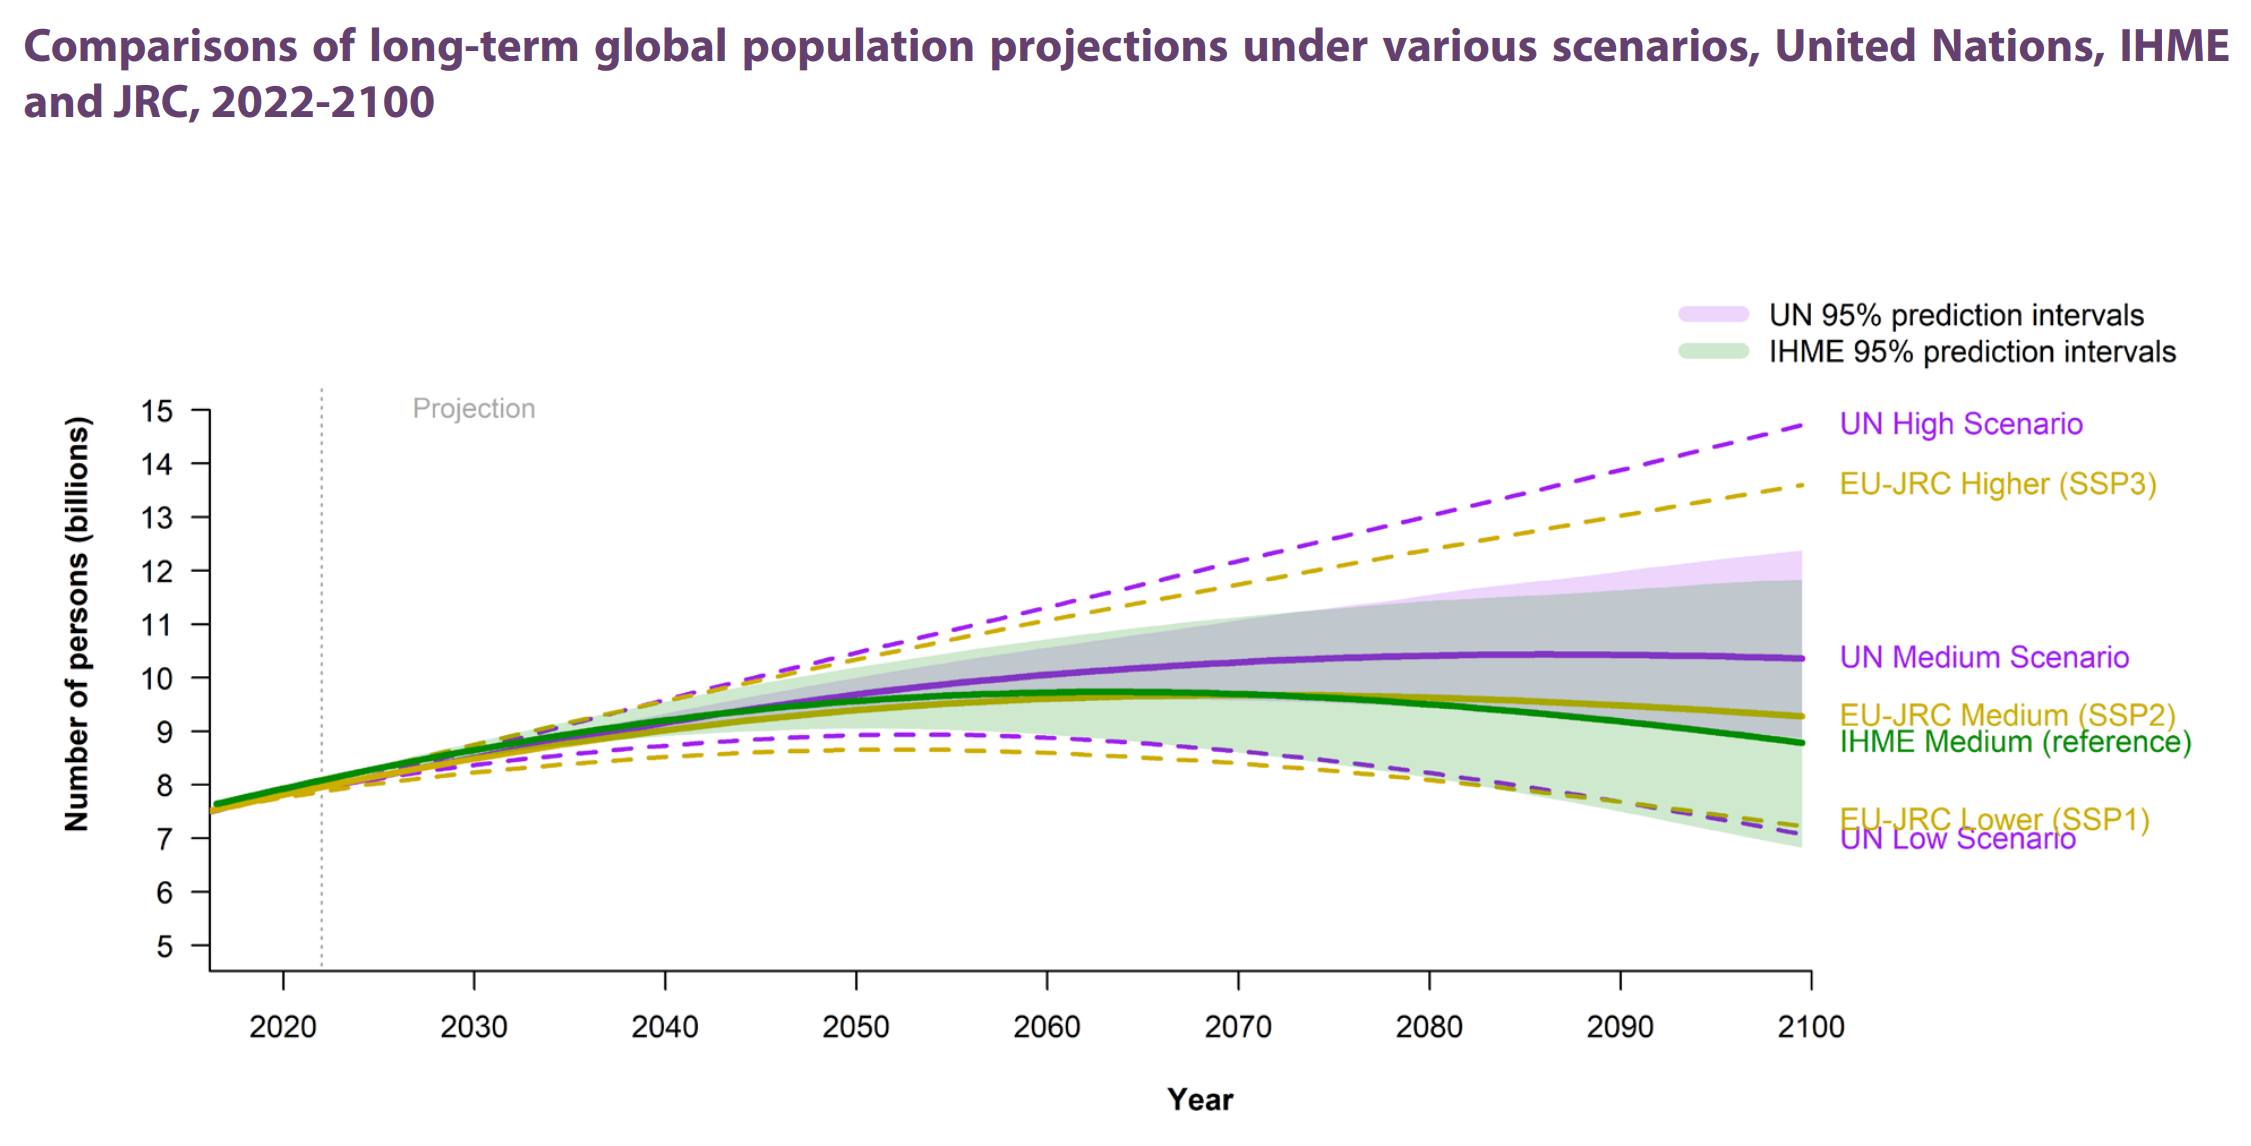 Comparisons of long-term global human population projections under various scenarios, United Nations, IHME and JRC, 2022-2100. Besides the probabilistic and deterministic population projections released by the United Nations, other institutions produce long term population projections. The latest sets of three shared socio-economic pathways (SSPs) published by the Joint Research Center of the European Commission (JRC) outline alternative scenarios illustrating a broad range of possible futures (European Commission, Joint Research Center, 2018). The first of these scenarios, SSP1, labelled ‘Sustainability/Rapid Social Development’, assumes an acceleration of the demographic transition through sustained investments in education and health that would contribute to future low levels of mortality and fertility. The second scenario, SSP2, labelled ‘Continuation/Medium Population Scenario’, is considered as the most likely future based on trends of recent decades and assumes a medium pathway in future fertility, mortality and education. The last scenario, SPP3, labelled ‘Fragmentation/Stalled Social Development’, is characterized by rapid population growth accompanied by low education, and high mortality and fertility. Alternative long-term population projections have also been undertaken by the Institute of Health Metrics and Evaluation (IHME). In its recent projections, IHME projected that the global population will reach 8.8 billion in 2100 with a range of 6.8 billion to 11.8 billion (figure III.4). The main difference between the projections released by IHME and the United Nations lies in the assumptions on the future level of fertility. IHME projects that the global level of fertility will decline faster than under the United Nations medium scenario. According to IHME, the average number of children per woman will decline to 1.66 children at the end of the century while the United Nations projects fertility to be around 1.84 at the same date. Graphic: UN DESA